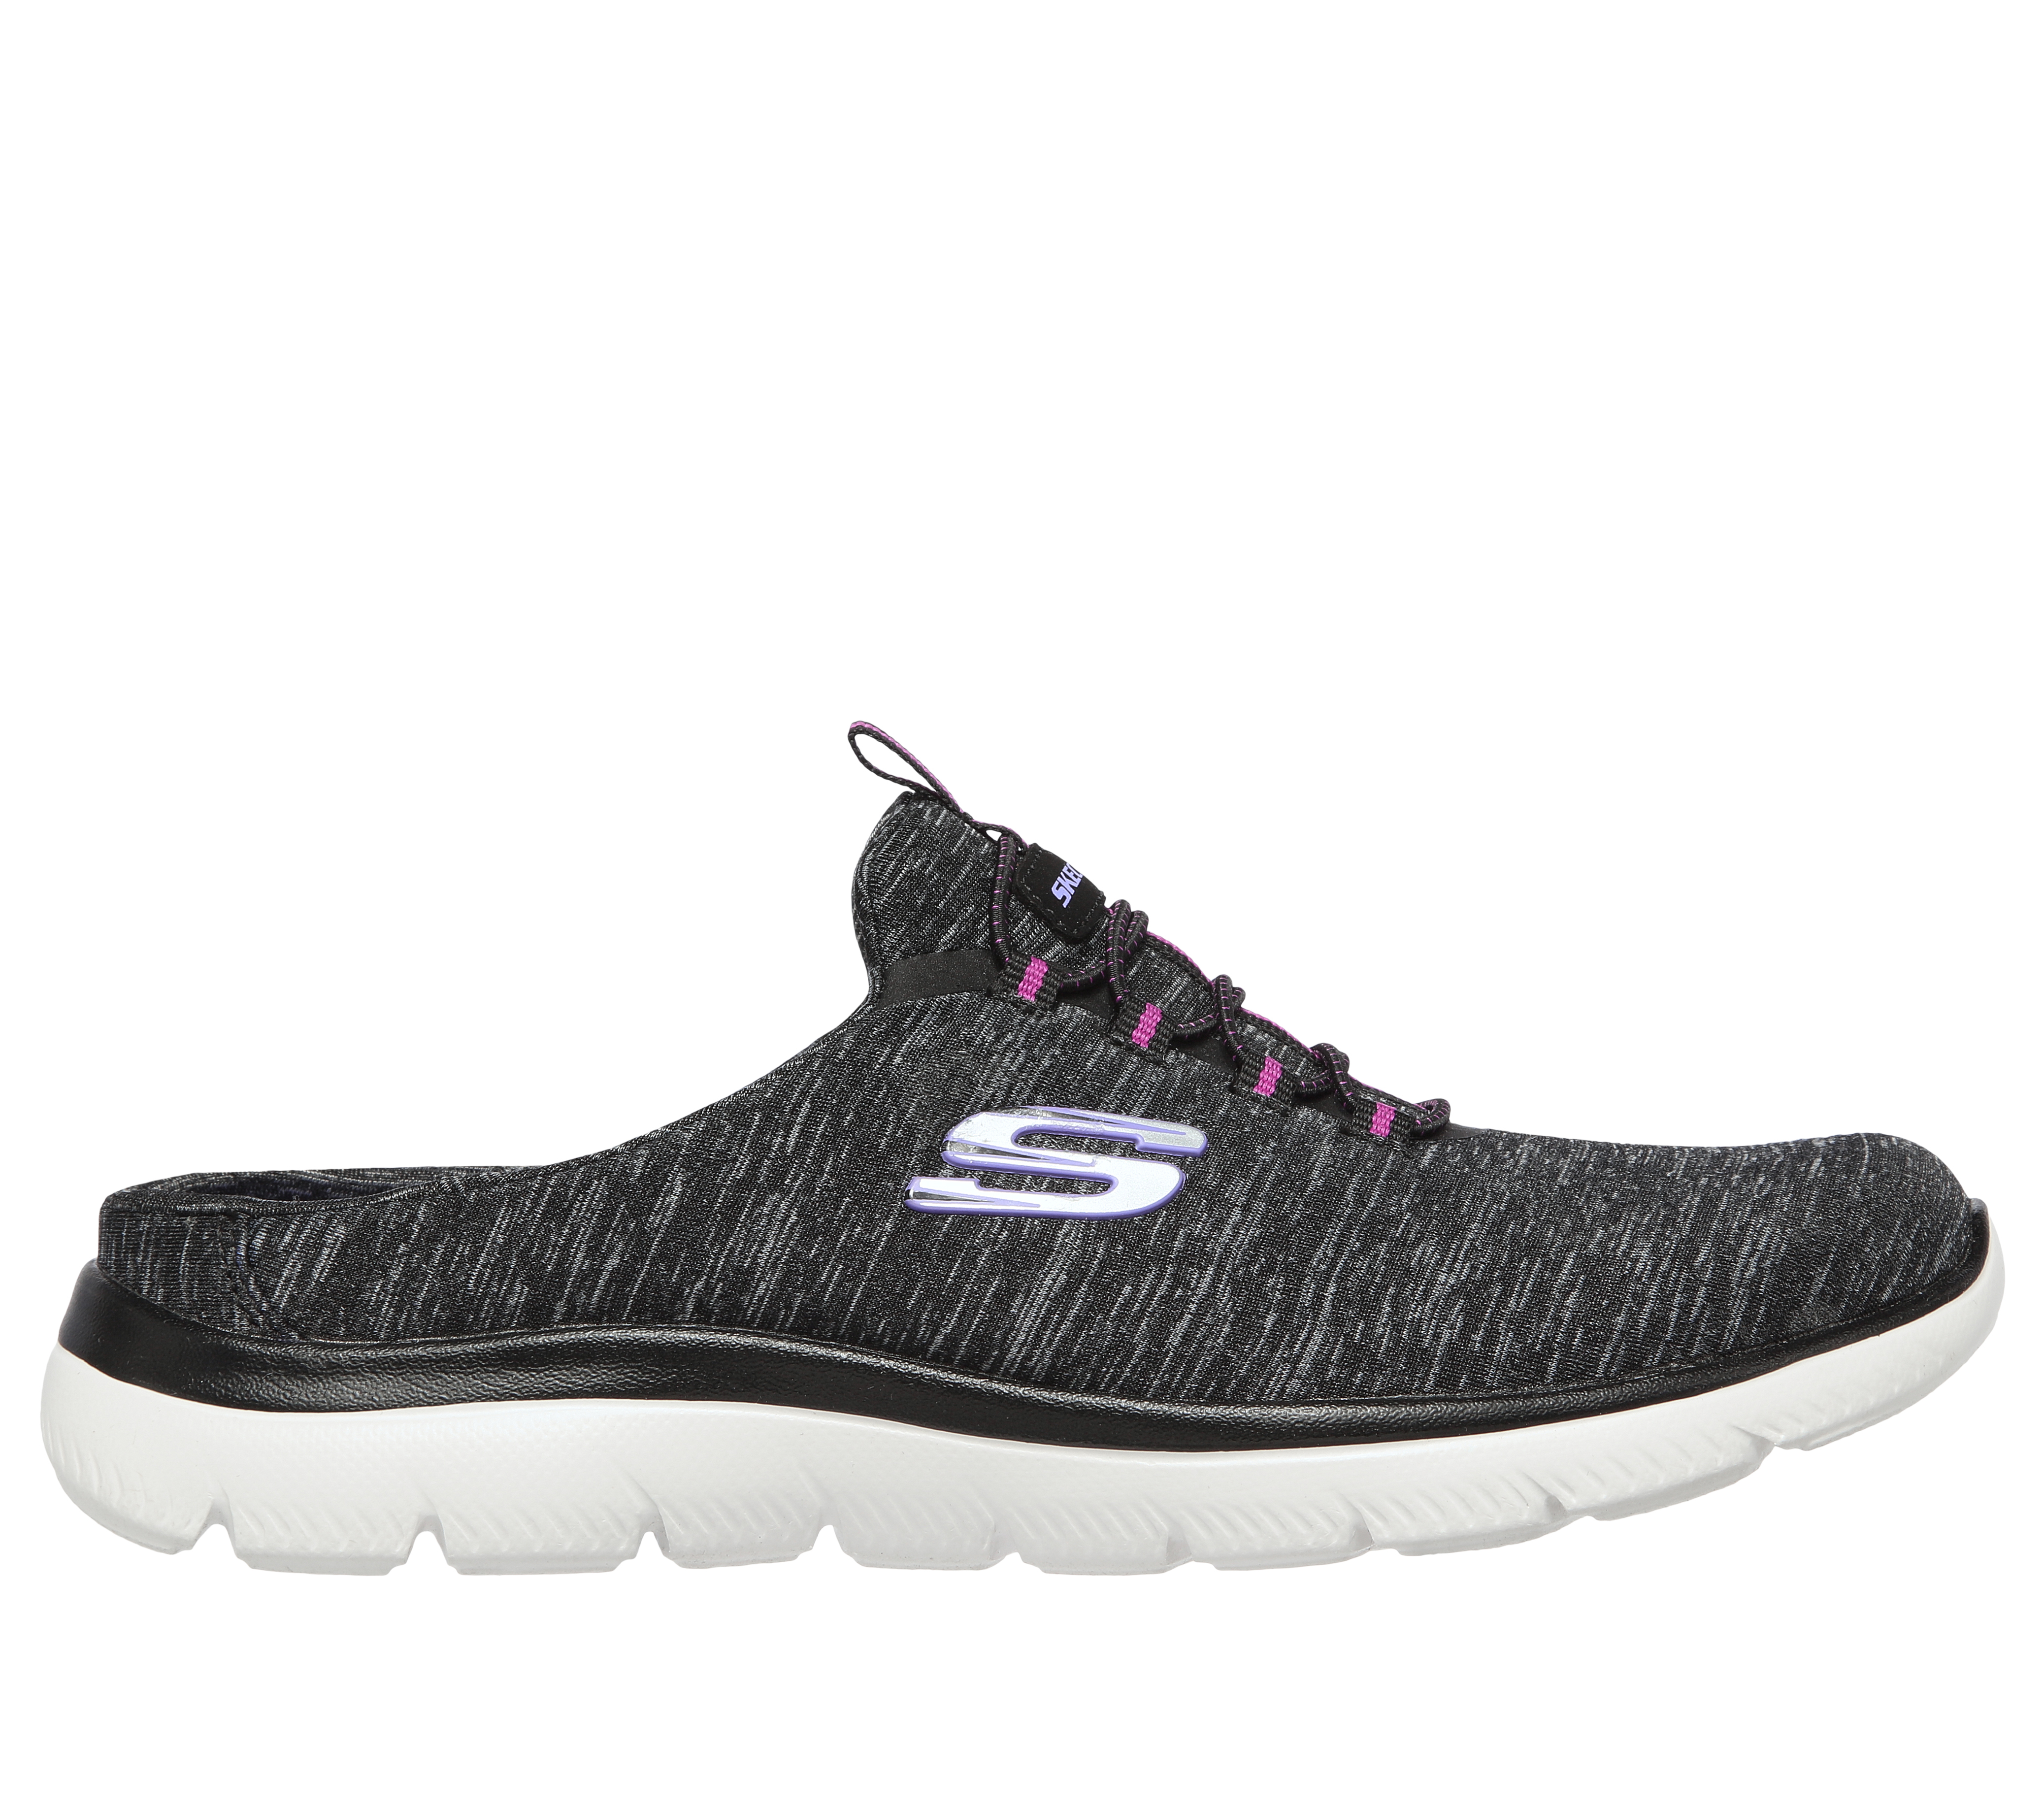 Shop the Summits - Fresh Aire | SKECHERS CA